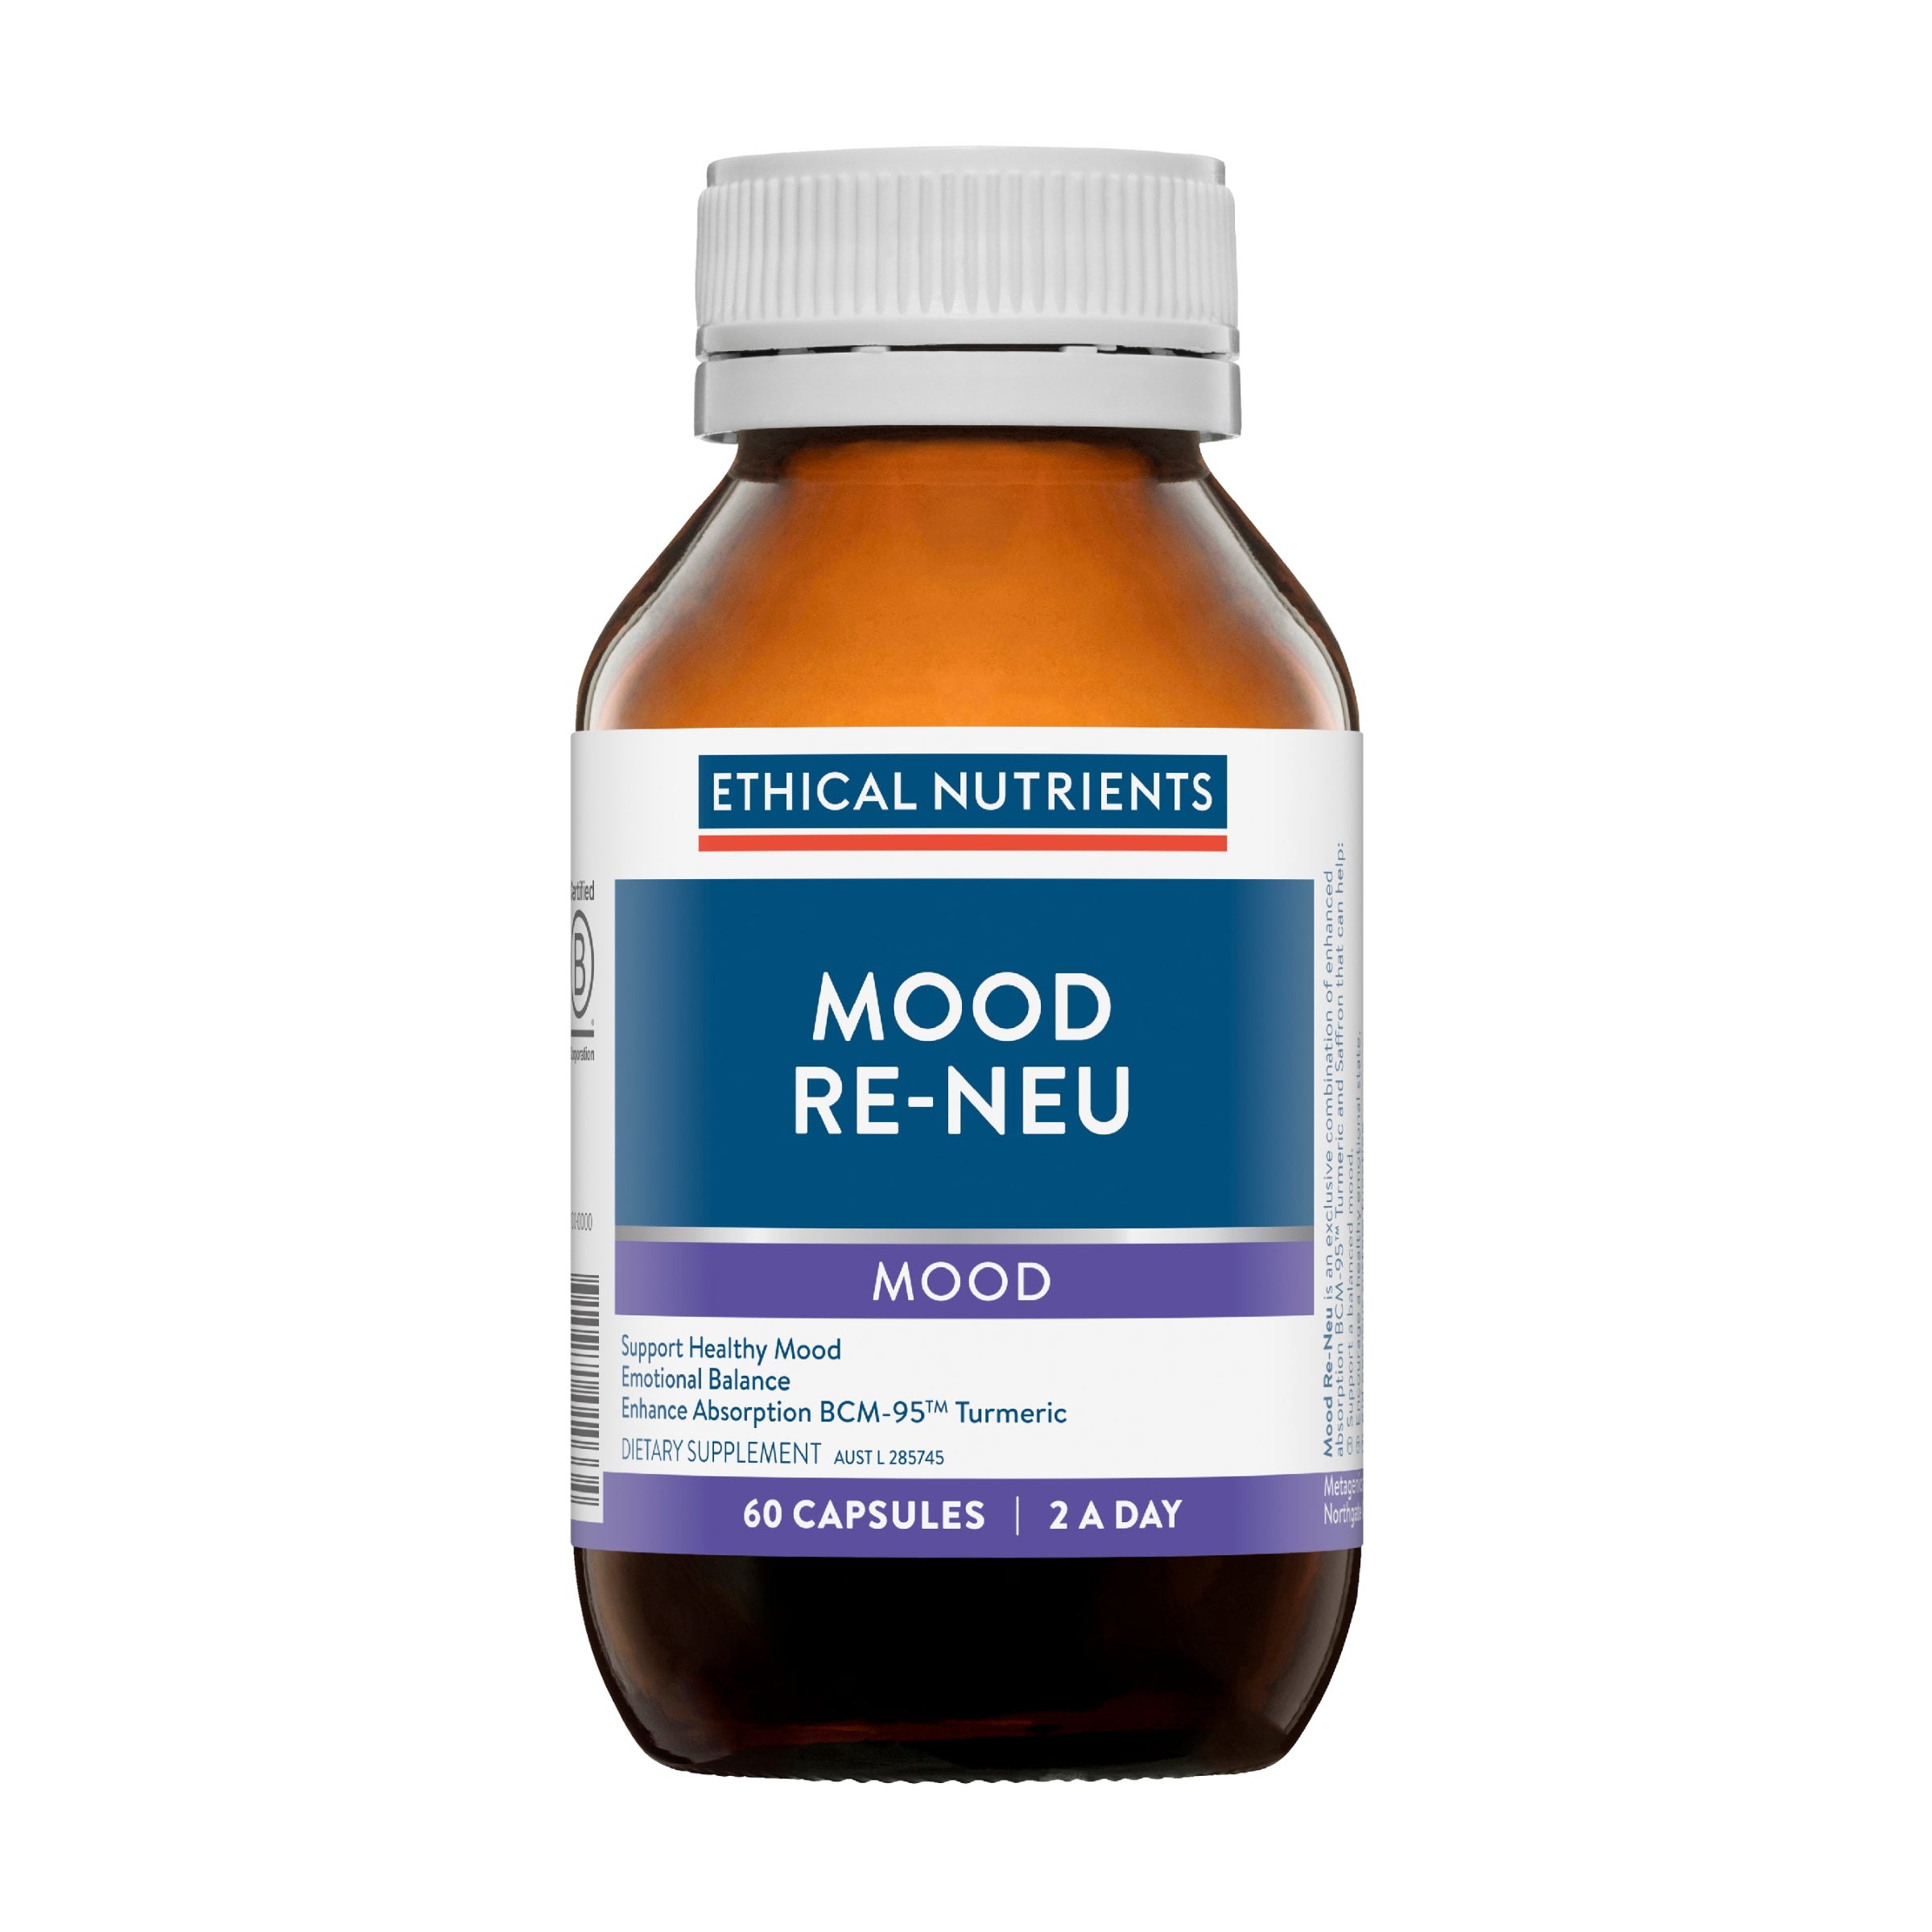 Ethical Nutrients Mood Re-Neu 60 Capsules #size_60 capsules